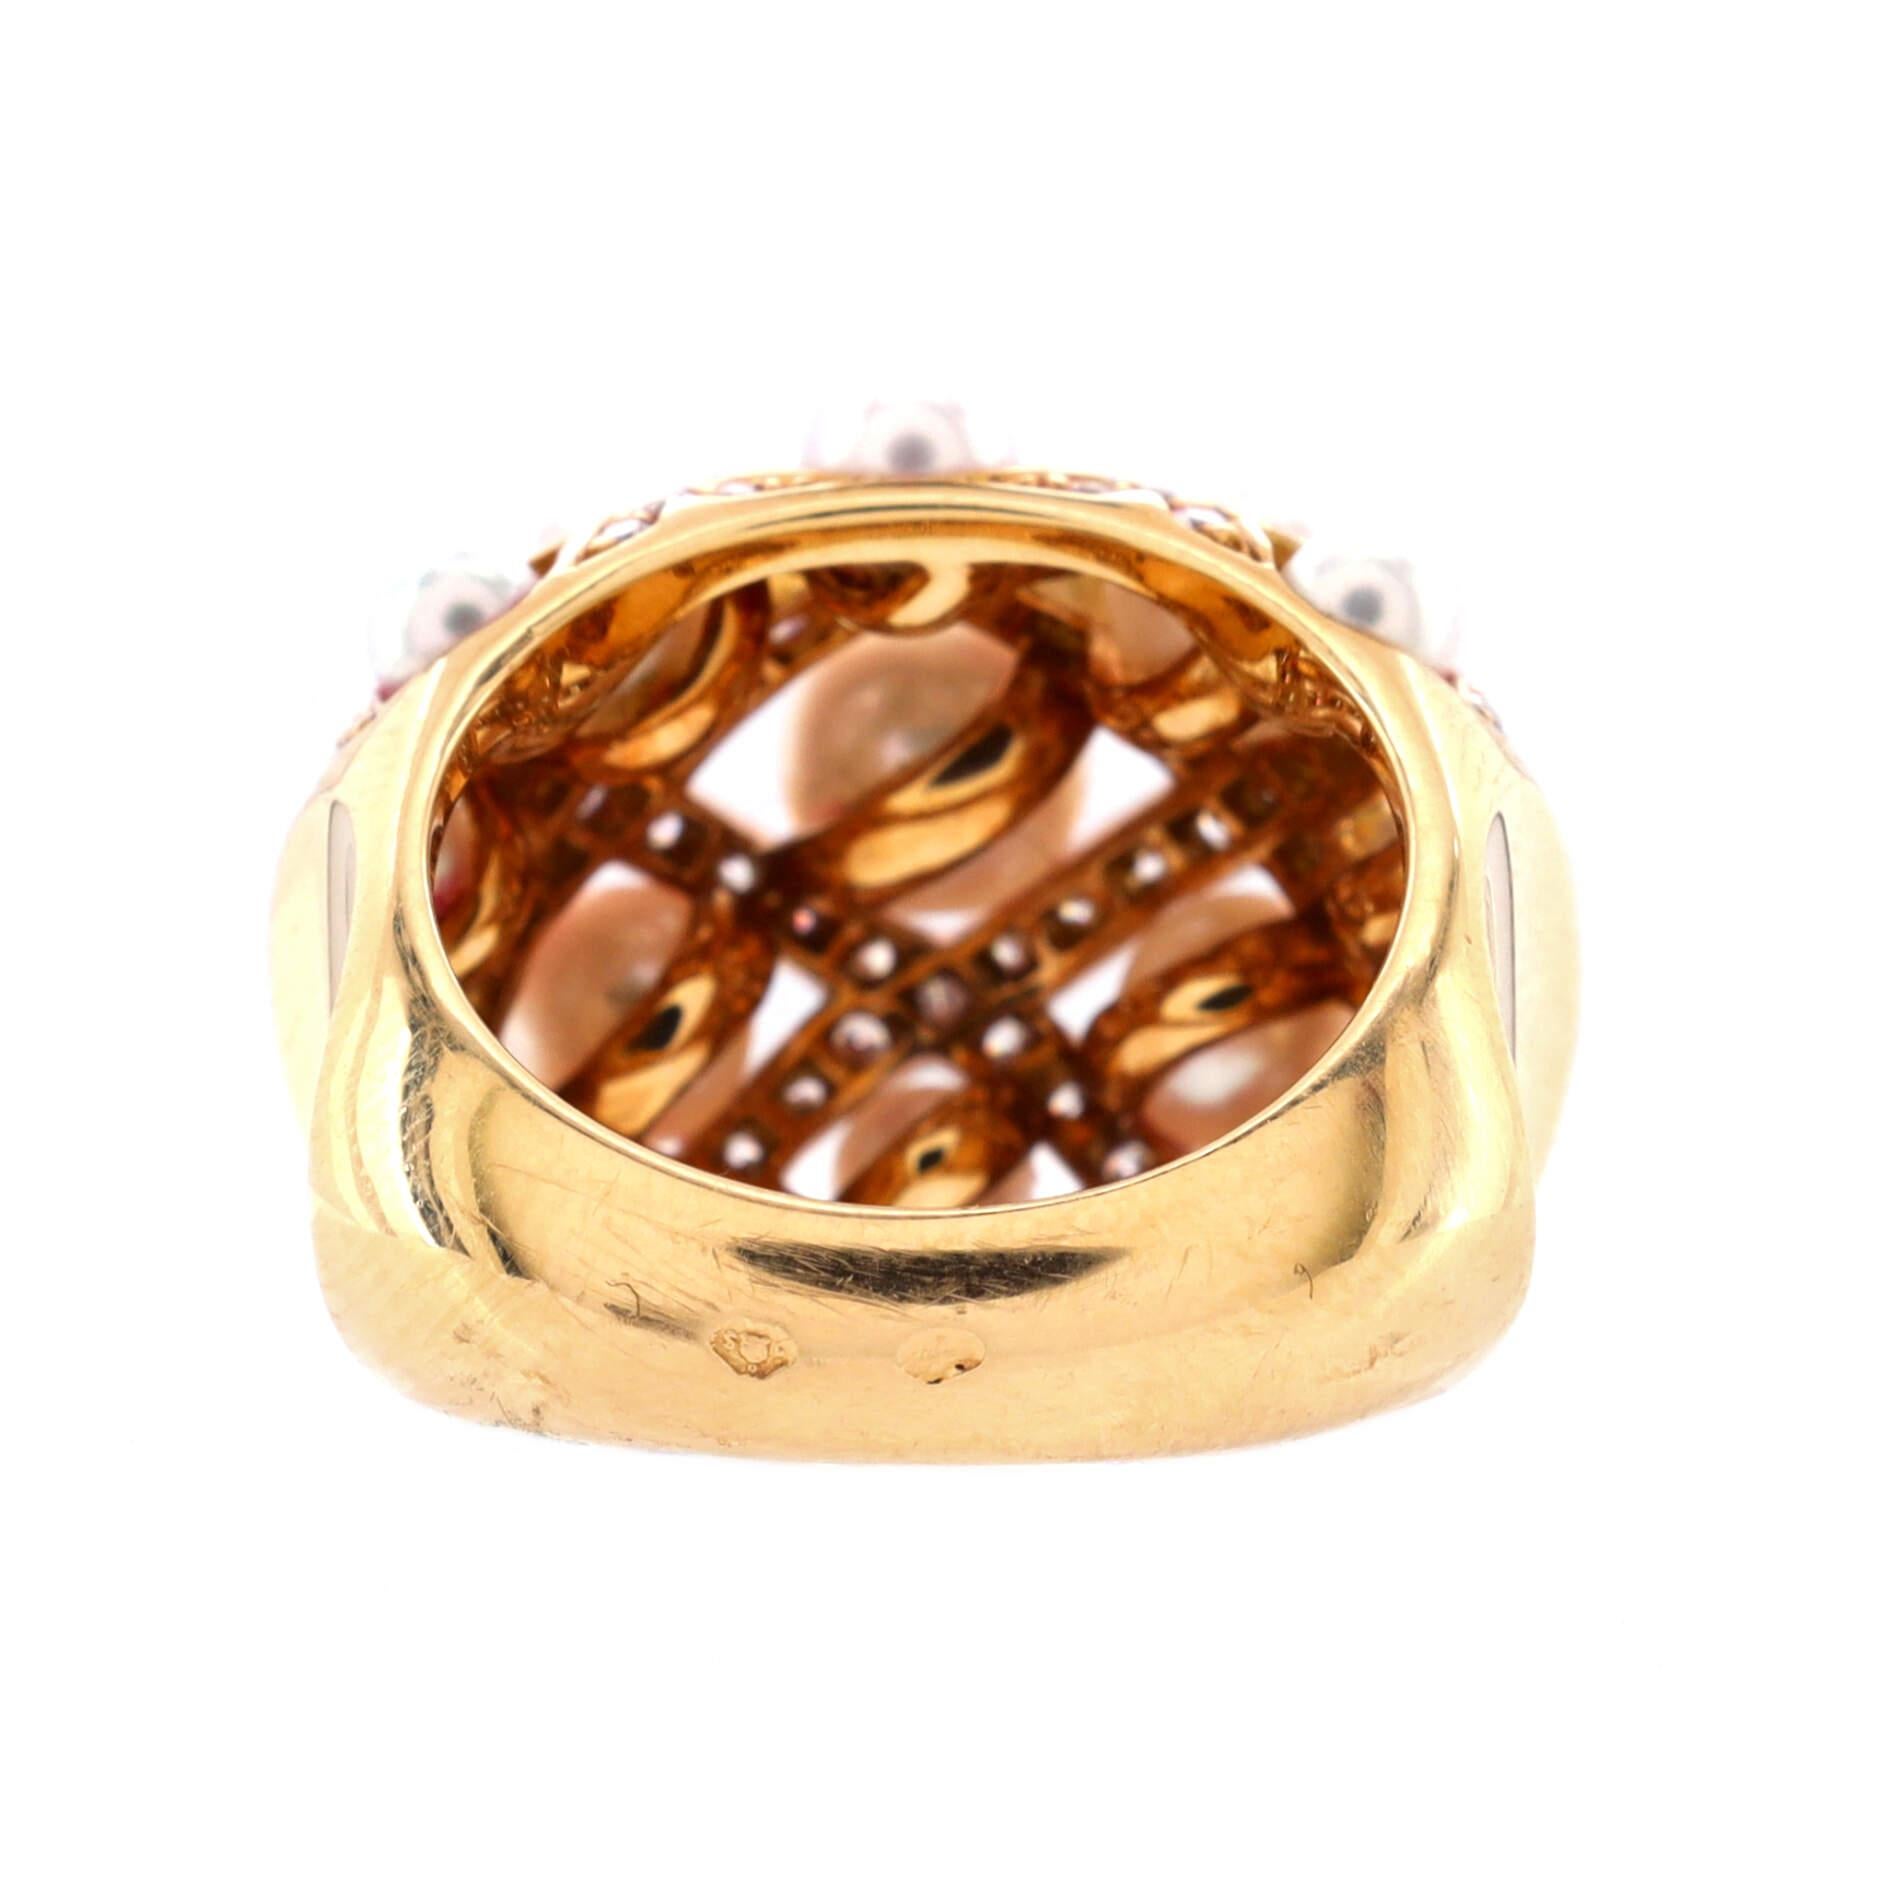 Women's Chanel Perles Matelasse Ring 18k Yellow Gold with Cultured Pearls and Diamonds